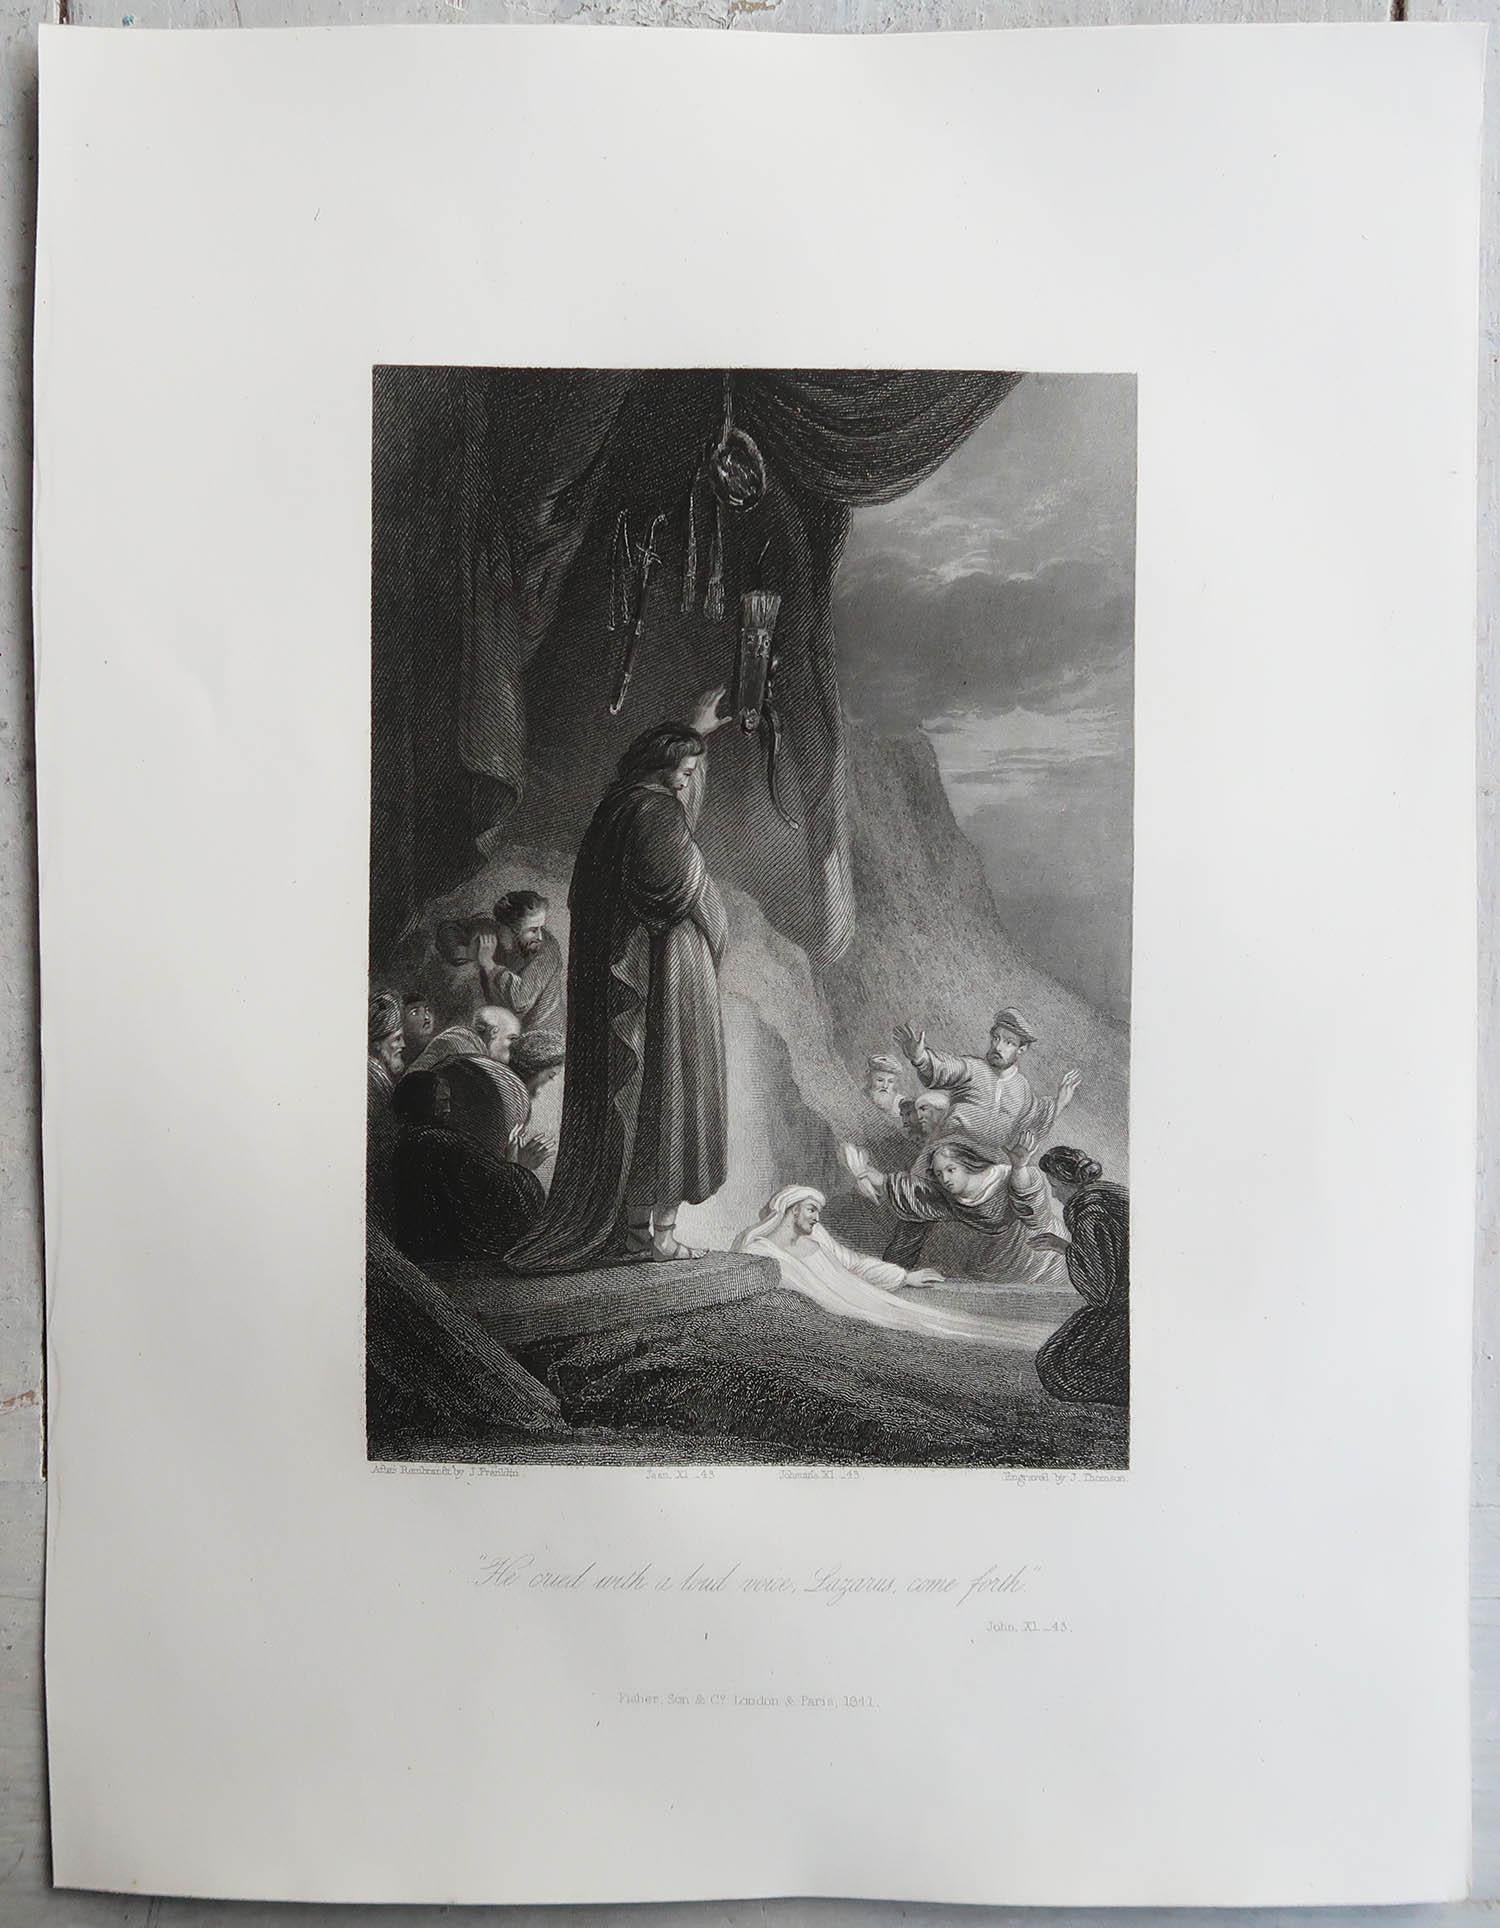 English Original Antique Print After Rembrandt, the Raising of Lazarus, Dated 1841